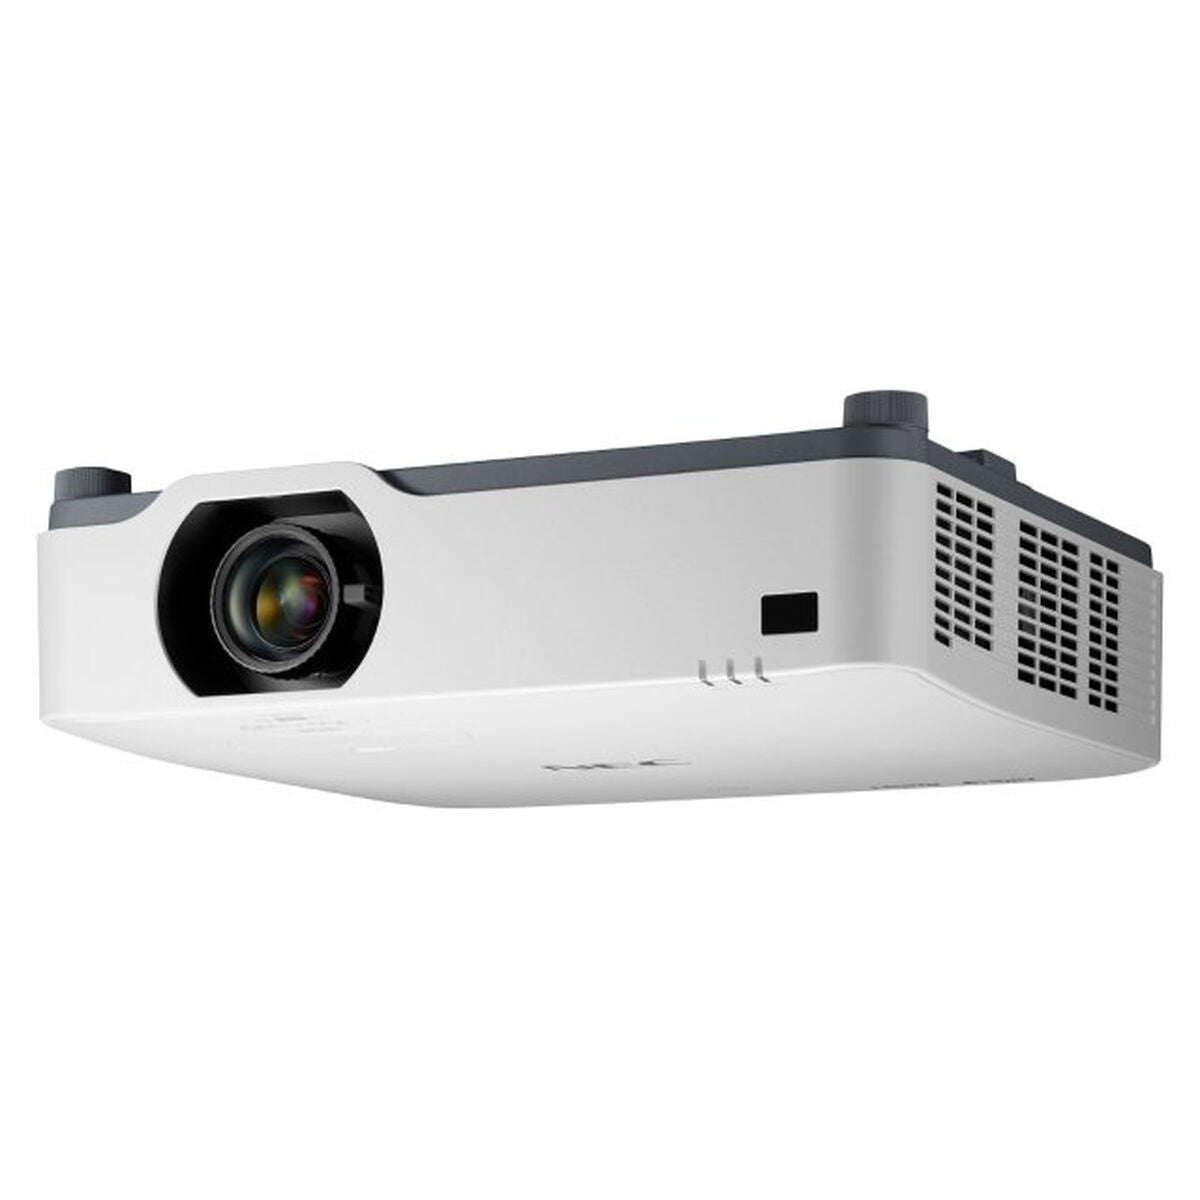 Projector NEC P627UL 6200 Lm, NEC, Electronics, TV, Video and home cinema, projector-nec-p627ul-6200-lm, Brand_NEC, category-reference-2609, category-reference-2642, category-reference-2947, category-reference-t-18805, category-reference-t-19653, cinema and television, computers / peripherals, Condition_NEW, entertainment, office, Price_+ 1000, RiotNook